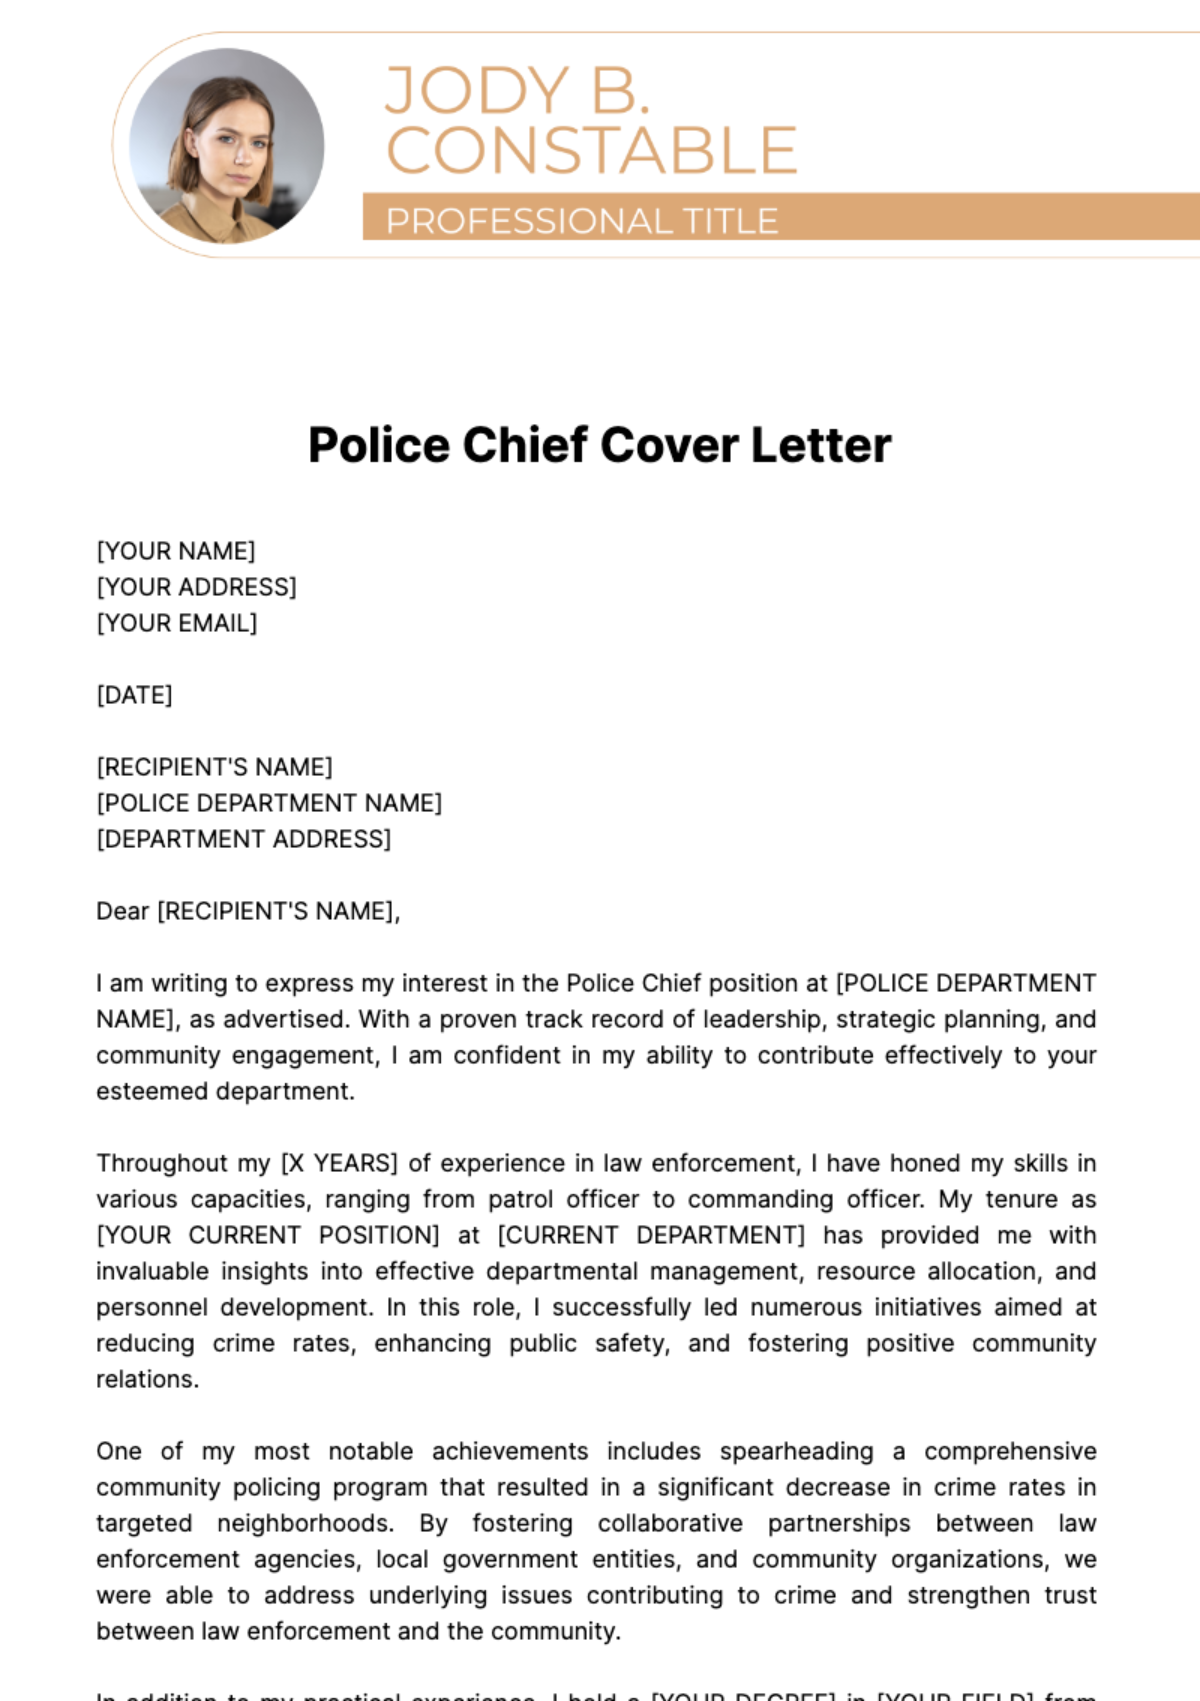 Free Police Chief Cover Letter Template